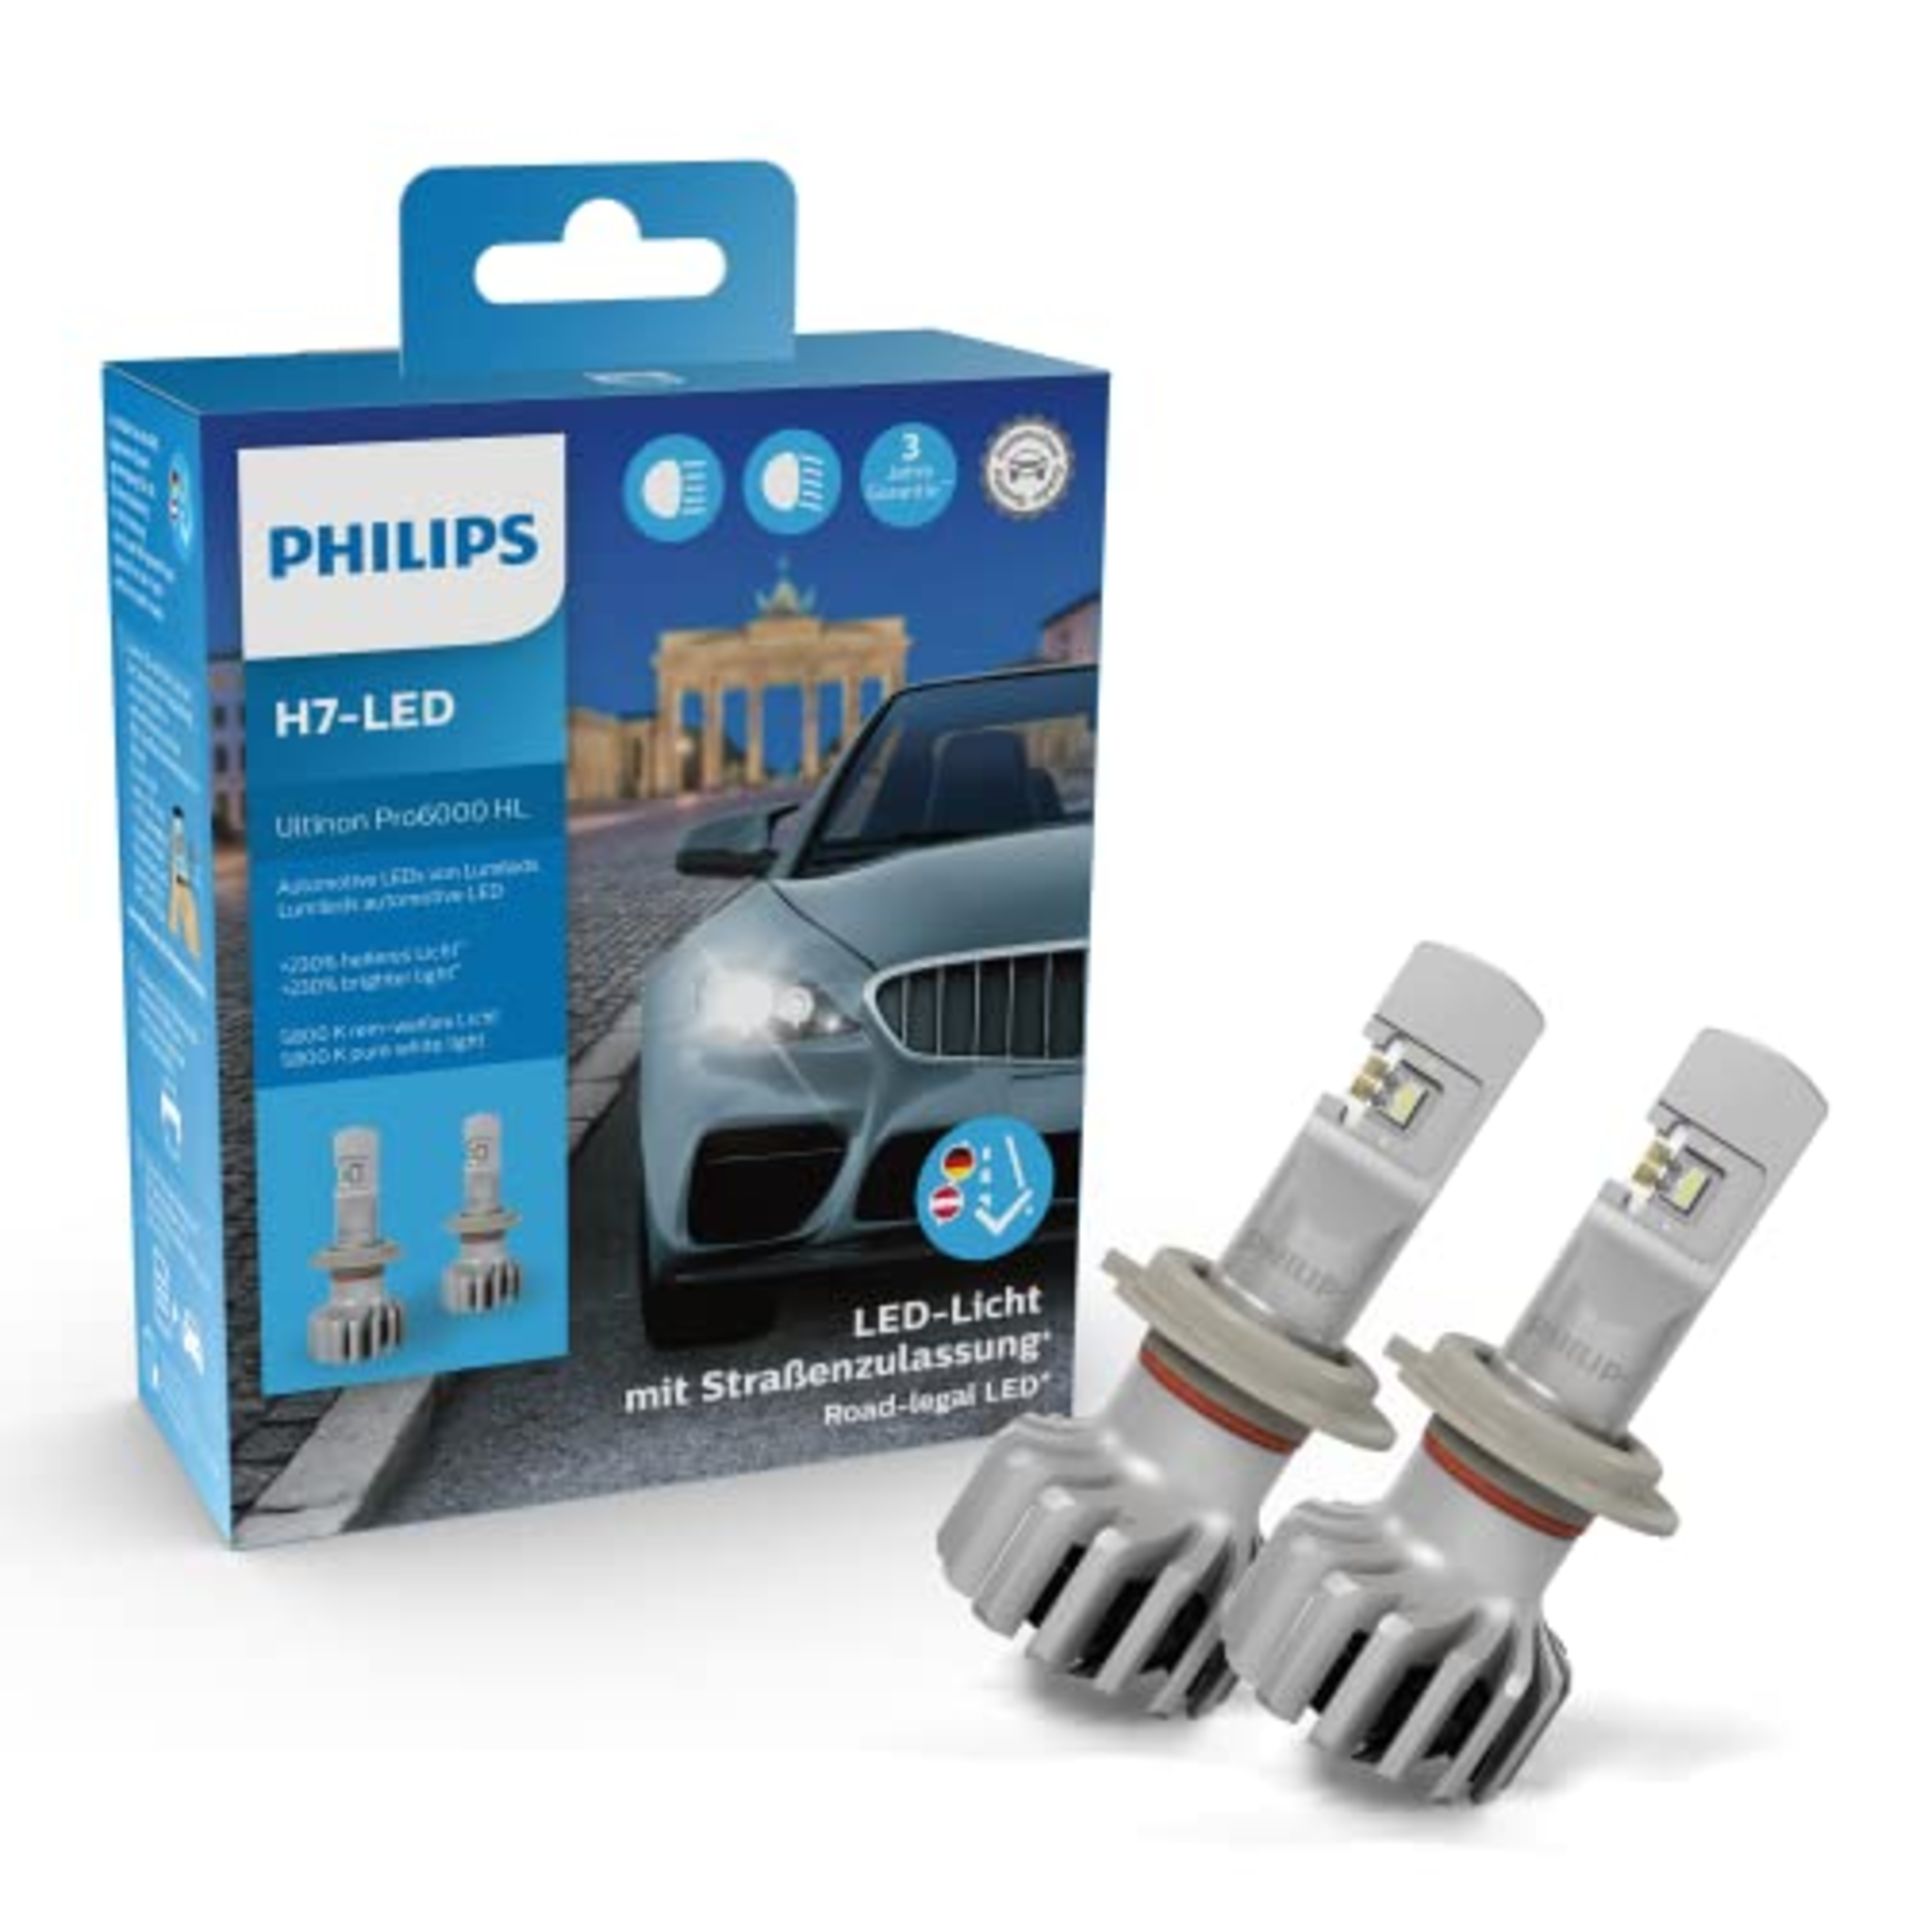 RRP £92.00 Philips Ultinon Pro6000 H7-LED headlamp bulb with road approval, 230% brighter light